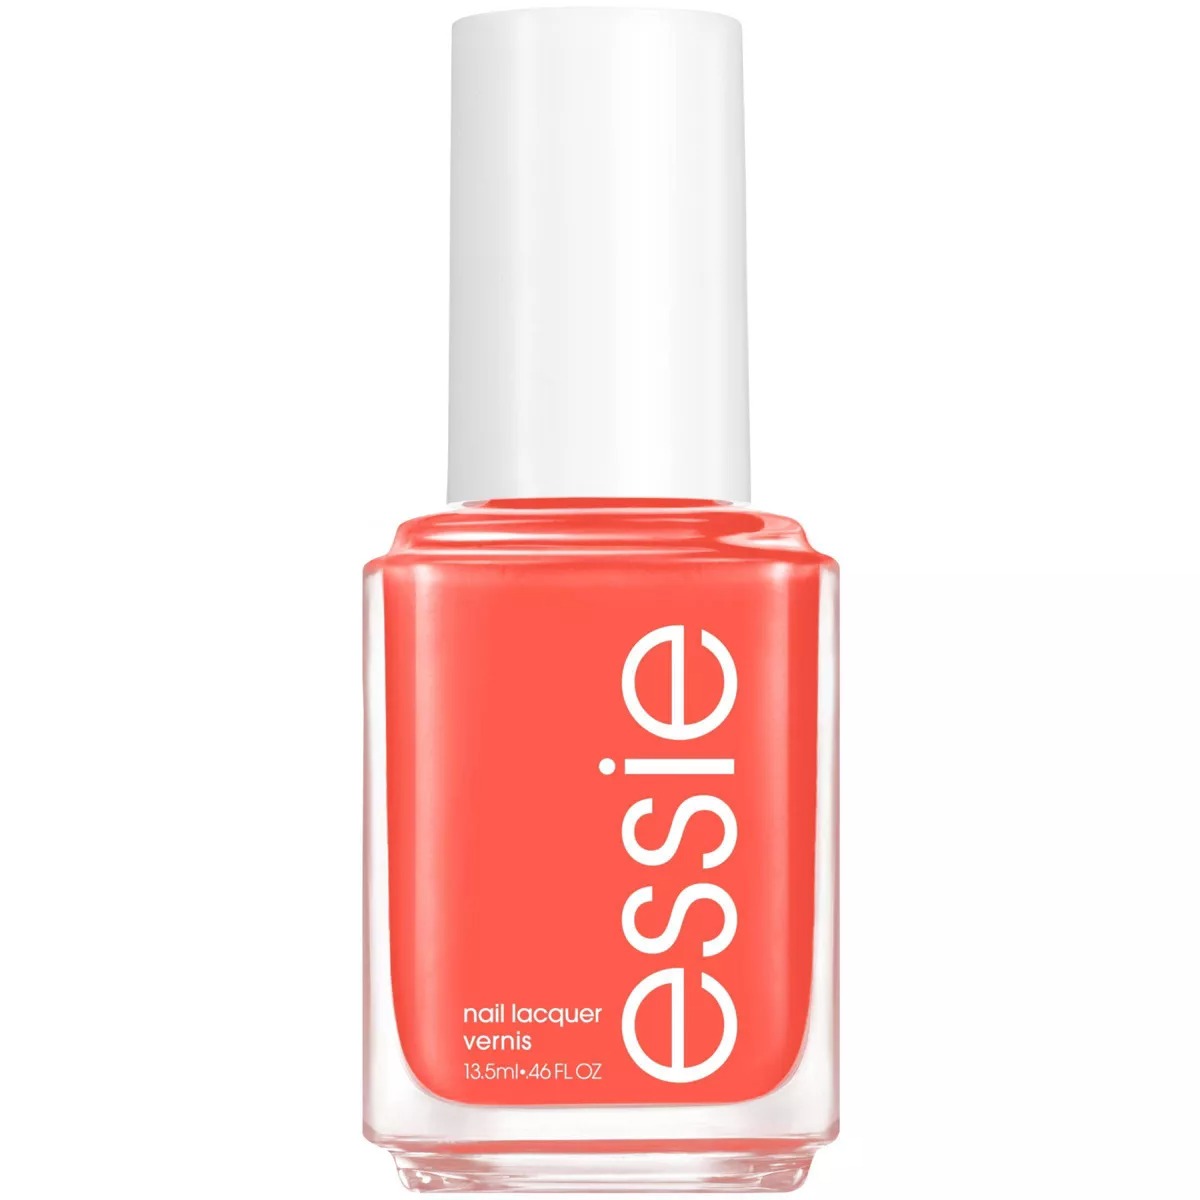 Essie Nail Polish in Check In to Check Out